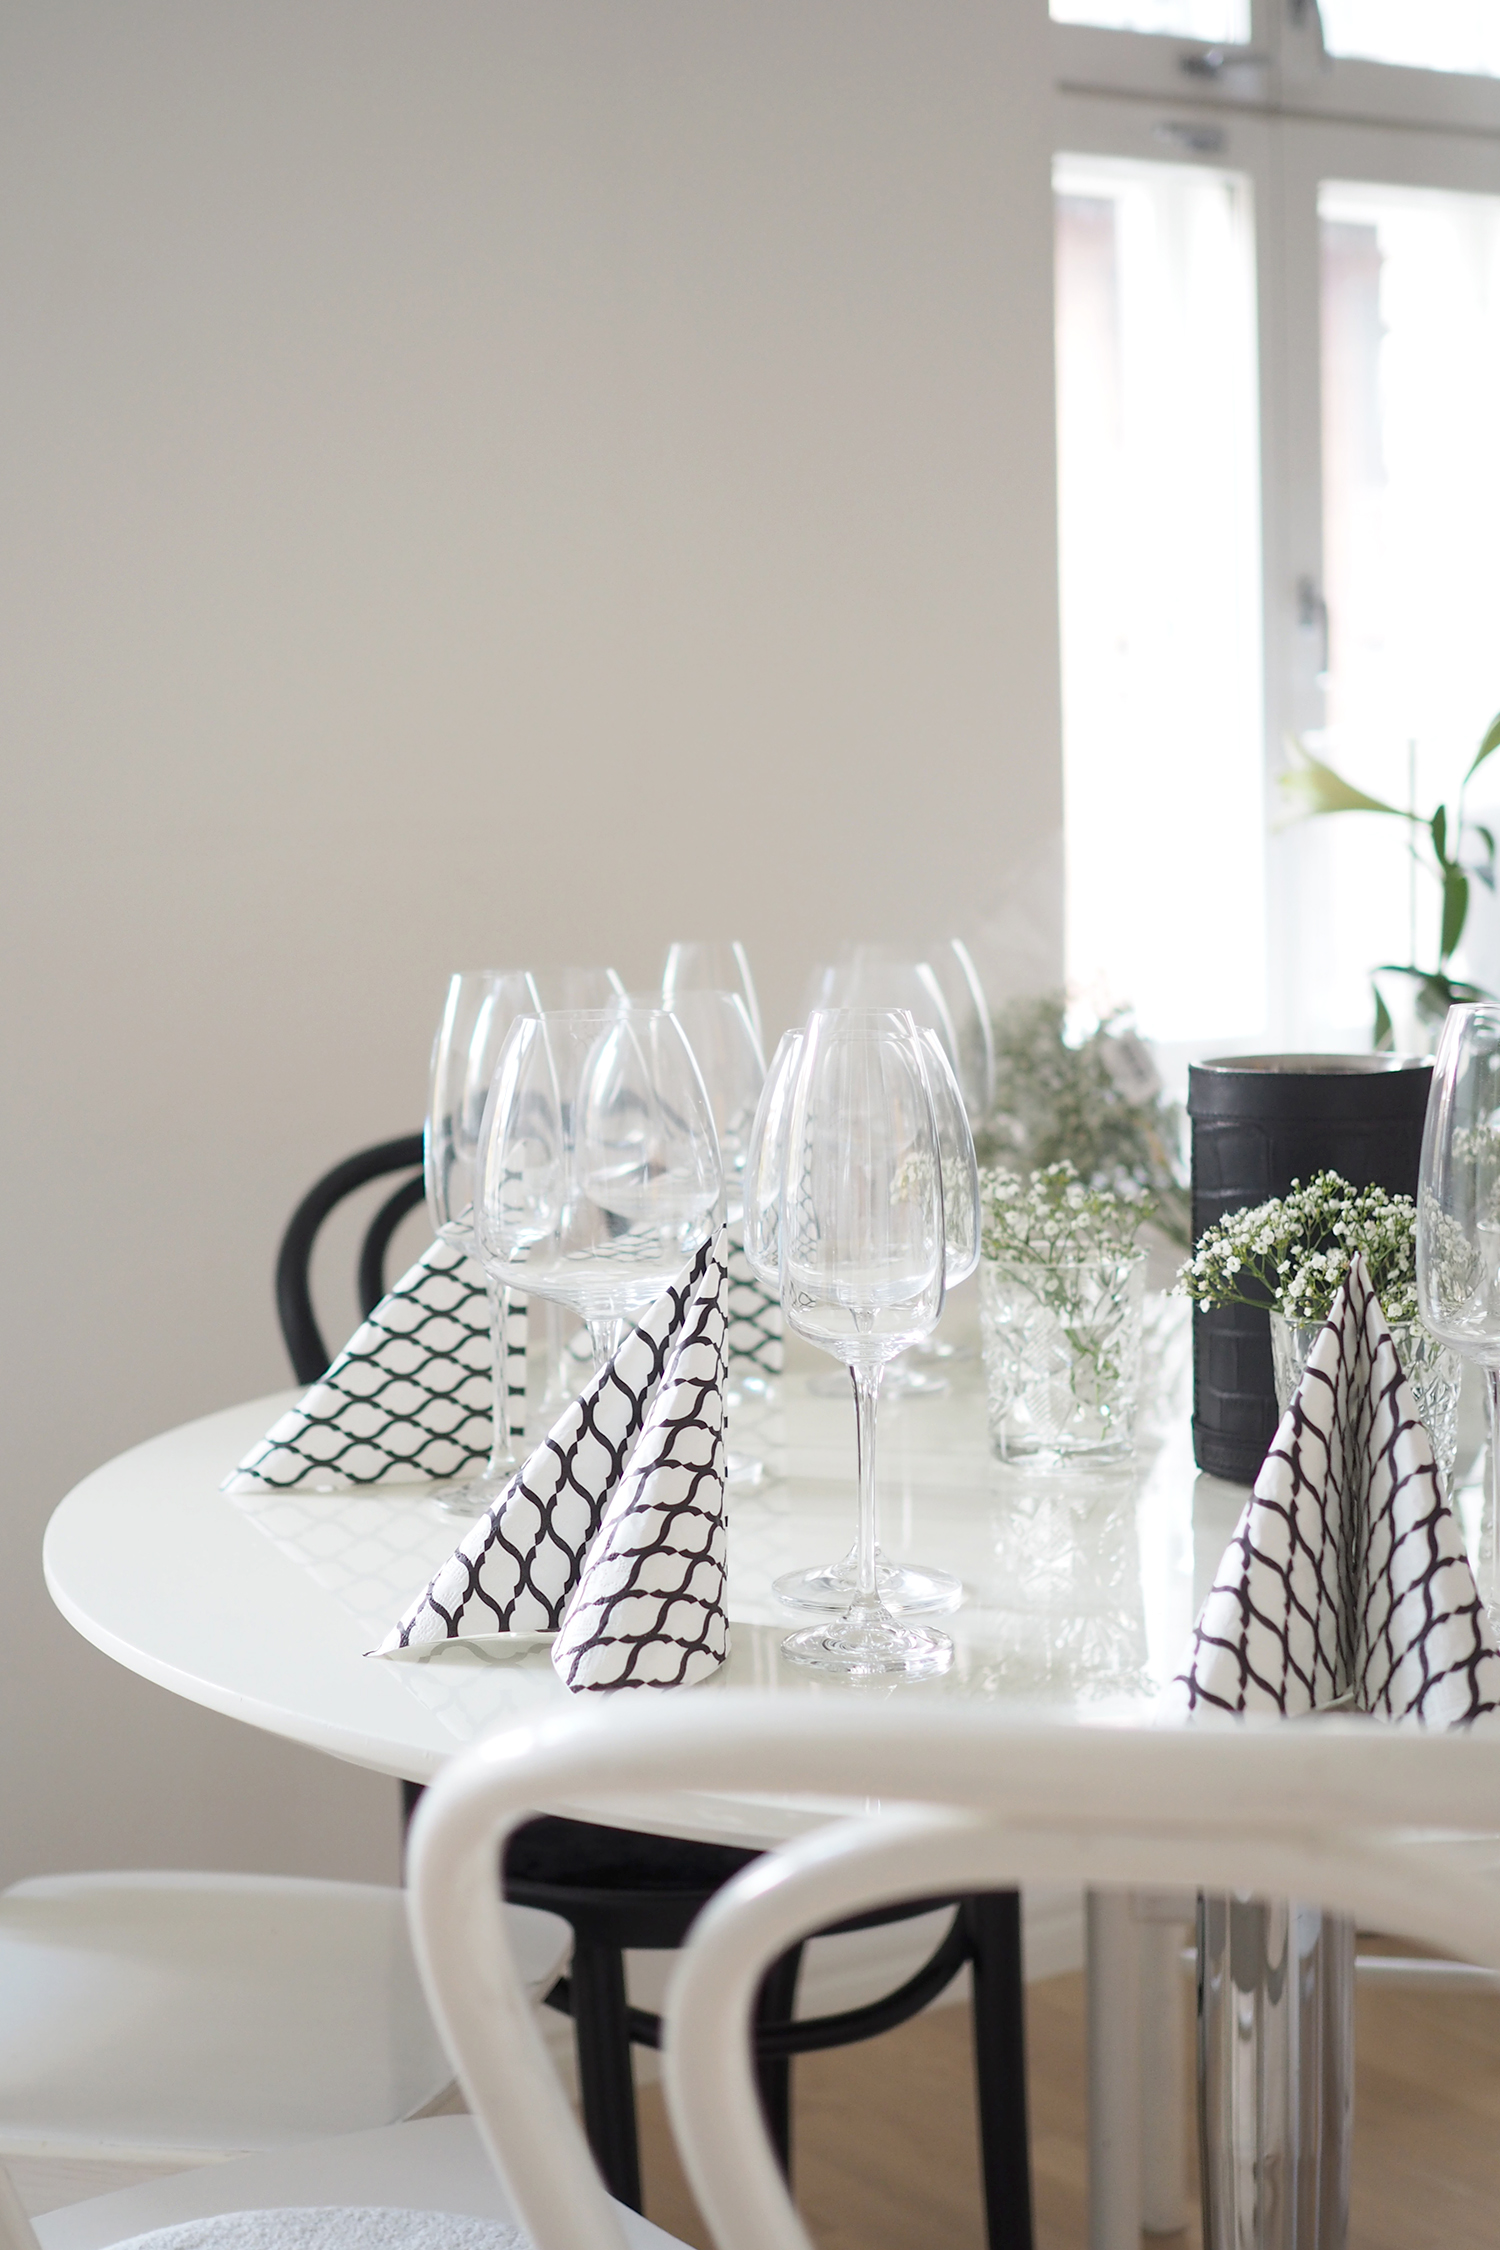 Char and the city - Preparing for a wine tasting evening - read more on the blog: //www.idealista.fi/charandthecity/2016/09/23/valmisteluita - #winetasting #party #tablesetting #decoration #interior #apartment #kitchen #partyplanning #blackandwhite 